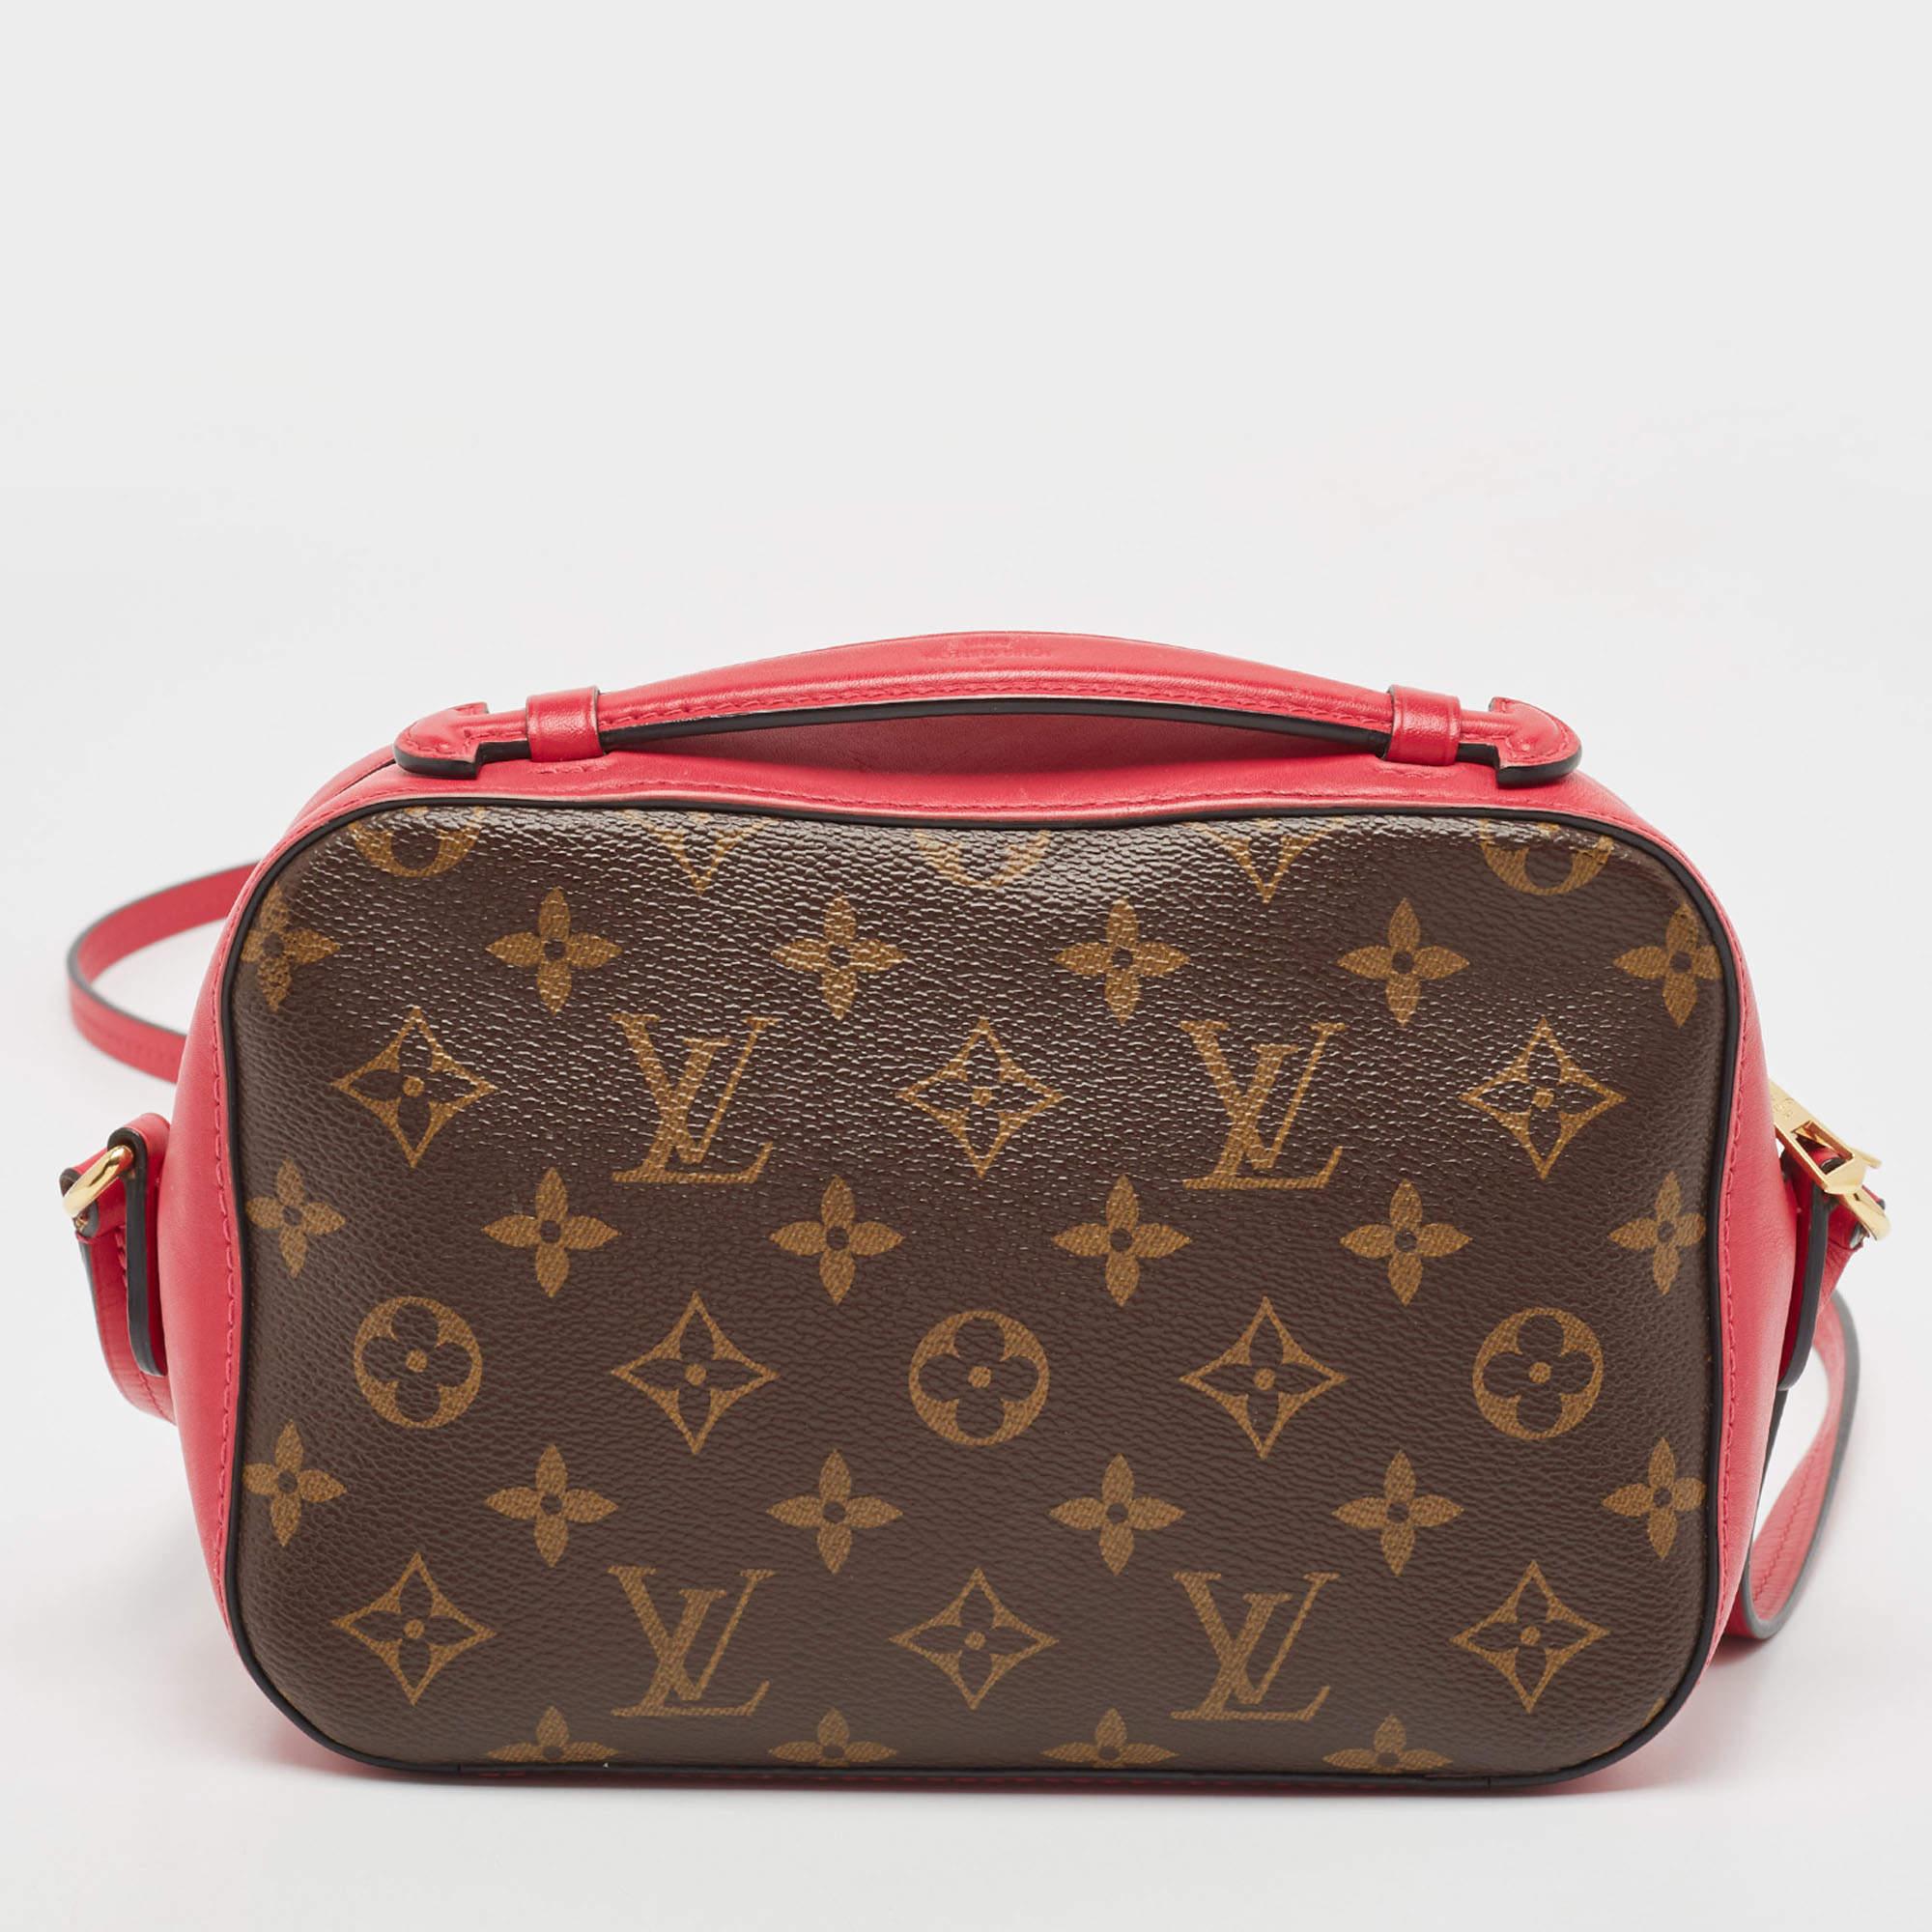 This elegant and versatile Saintonge crossbody bag is from the house of Louis Vuitton. It is crafted from monogram-coated canvas. The front of the bag is highlighted with a gold-tone accent attached for some extra character. Held by a top handle and